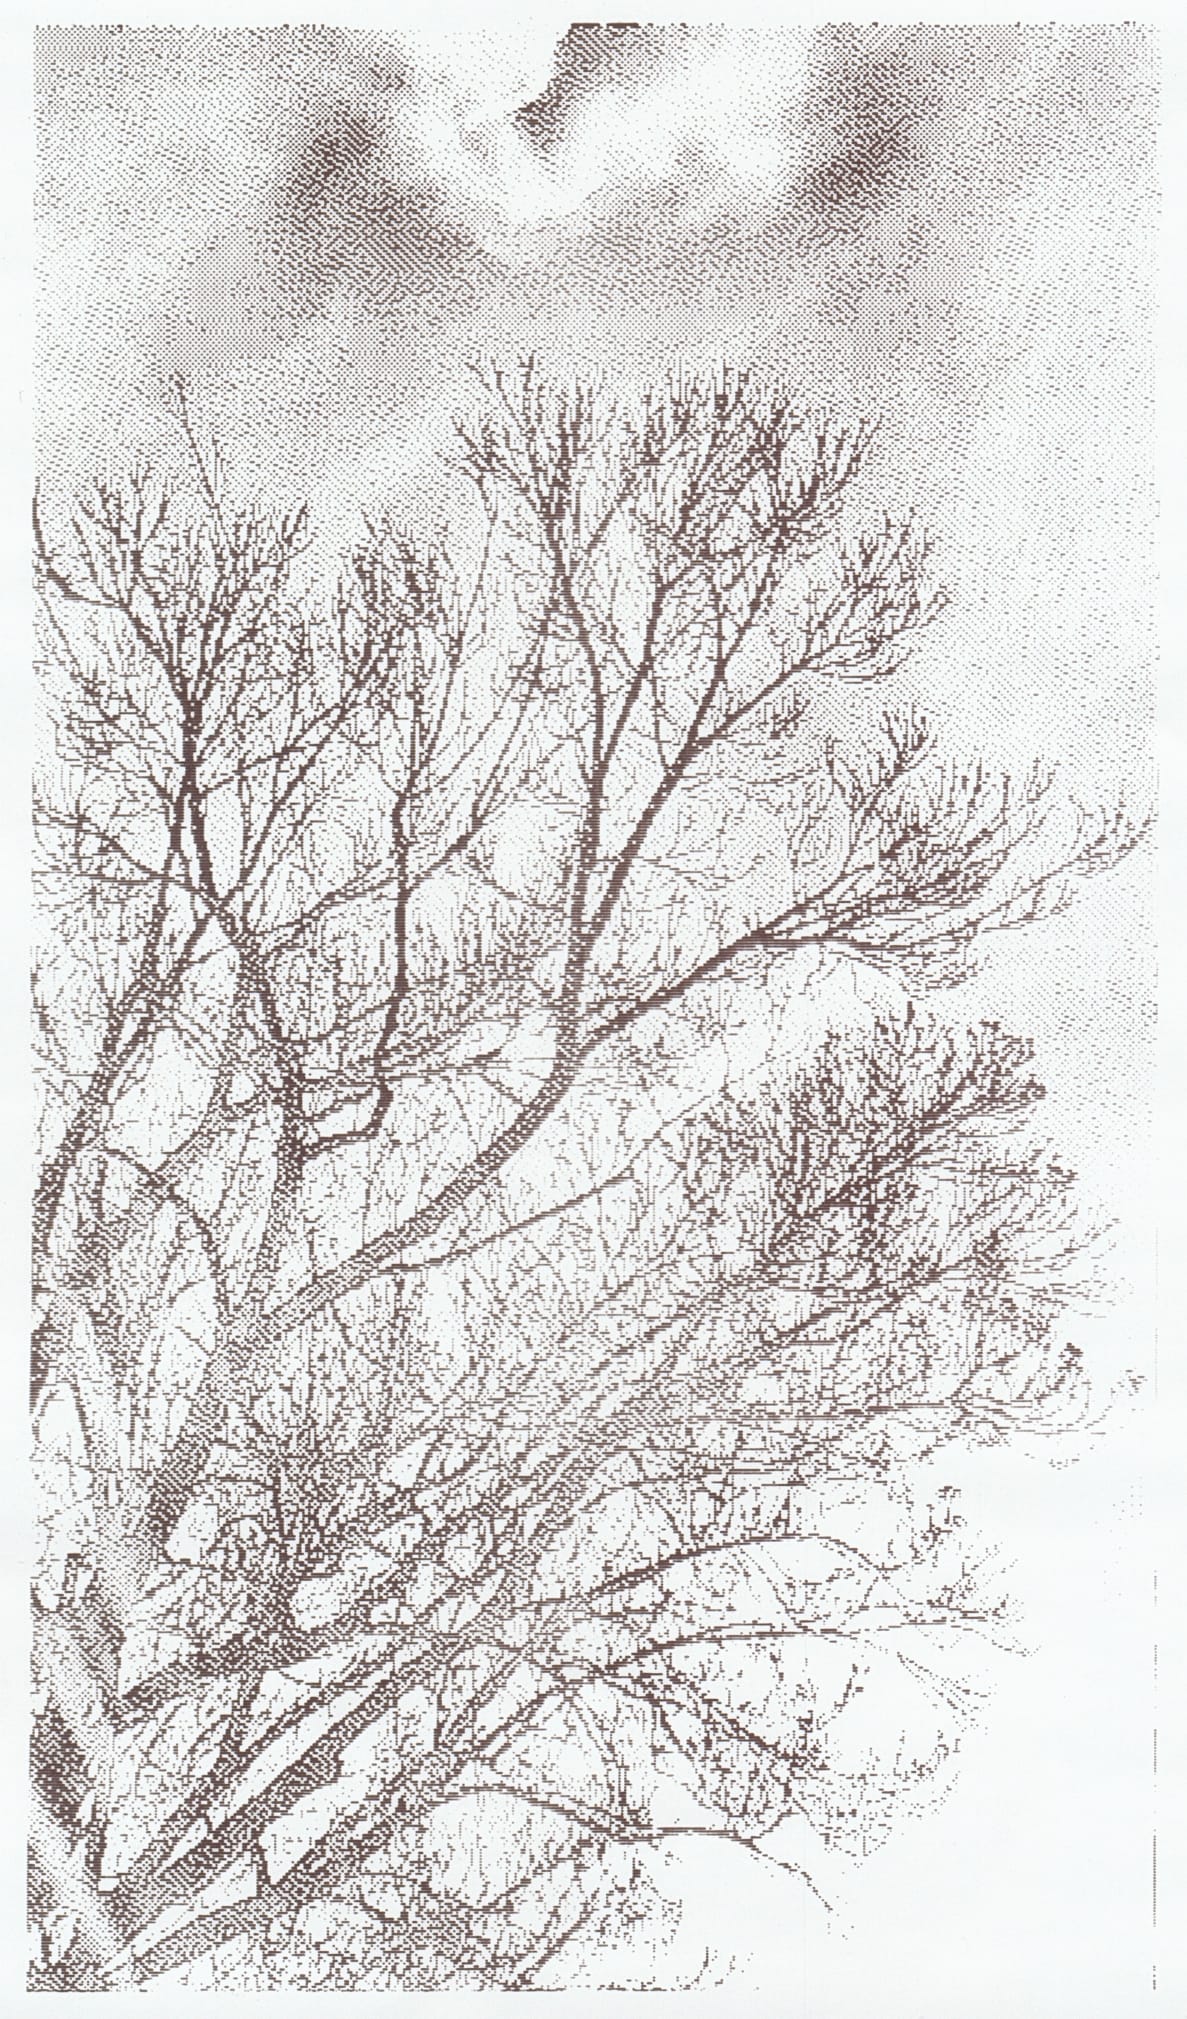 1-bit grayscale thermal print of tree branches against a partially cloudy sky, captured vertically